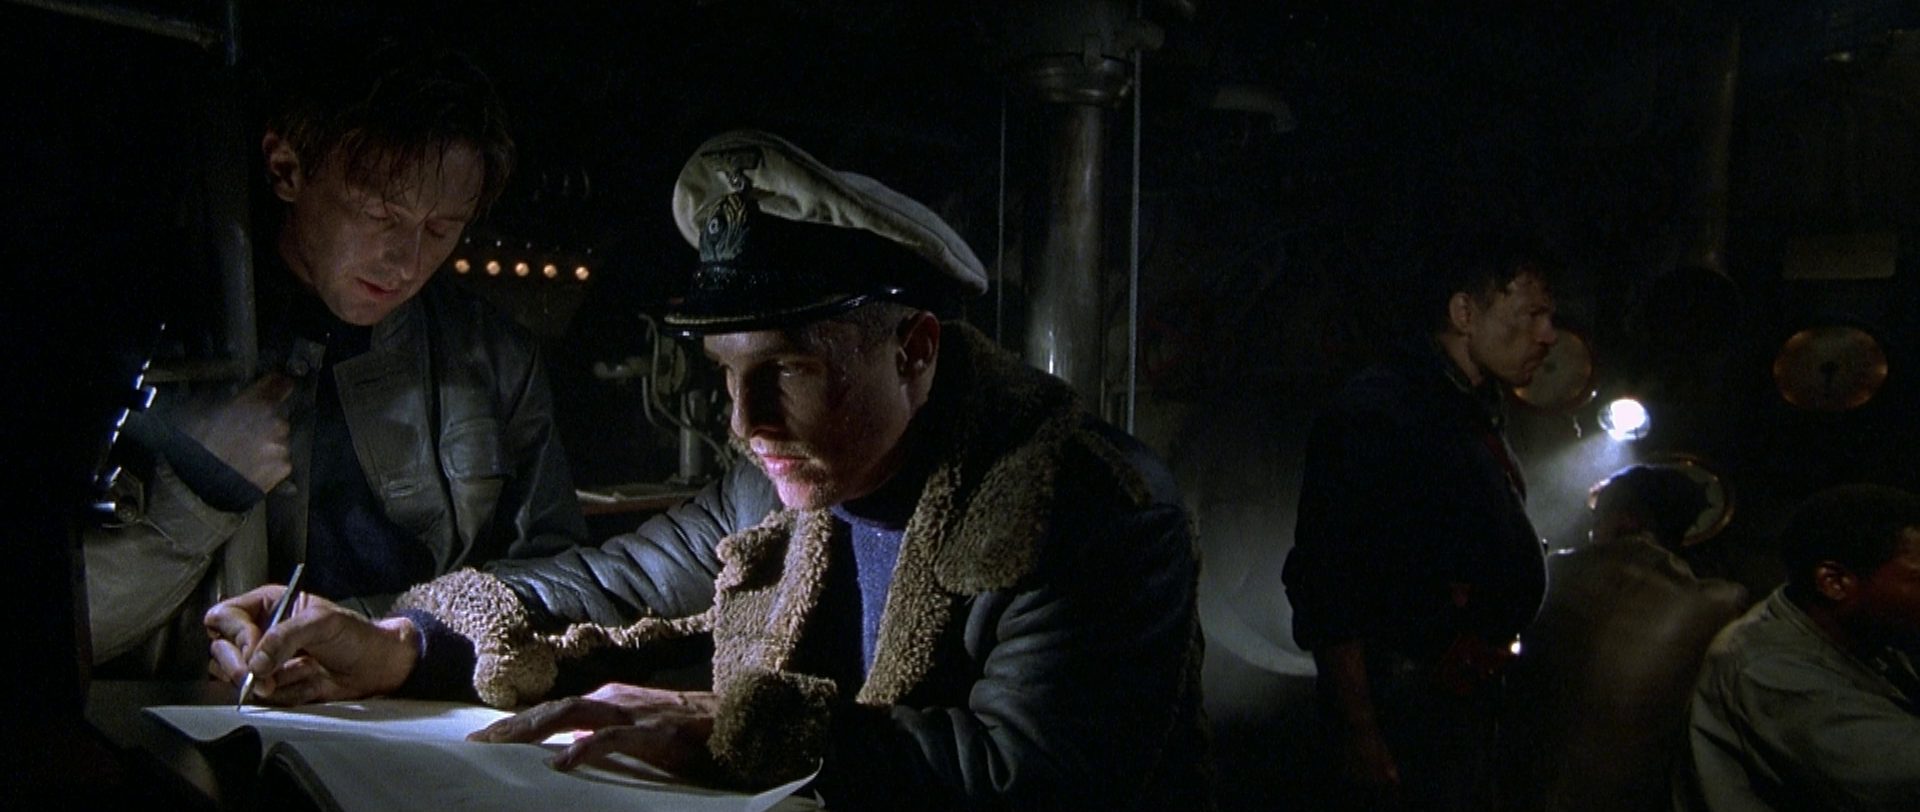 In a dimly lit environment, Matthew McConaughey, as an American commander in German uniform, concentrates in front of an open notebook in which he is writing in the presence of a comrade, with three other submariners in the background.